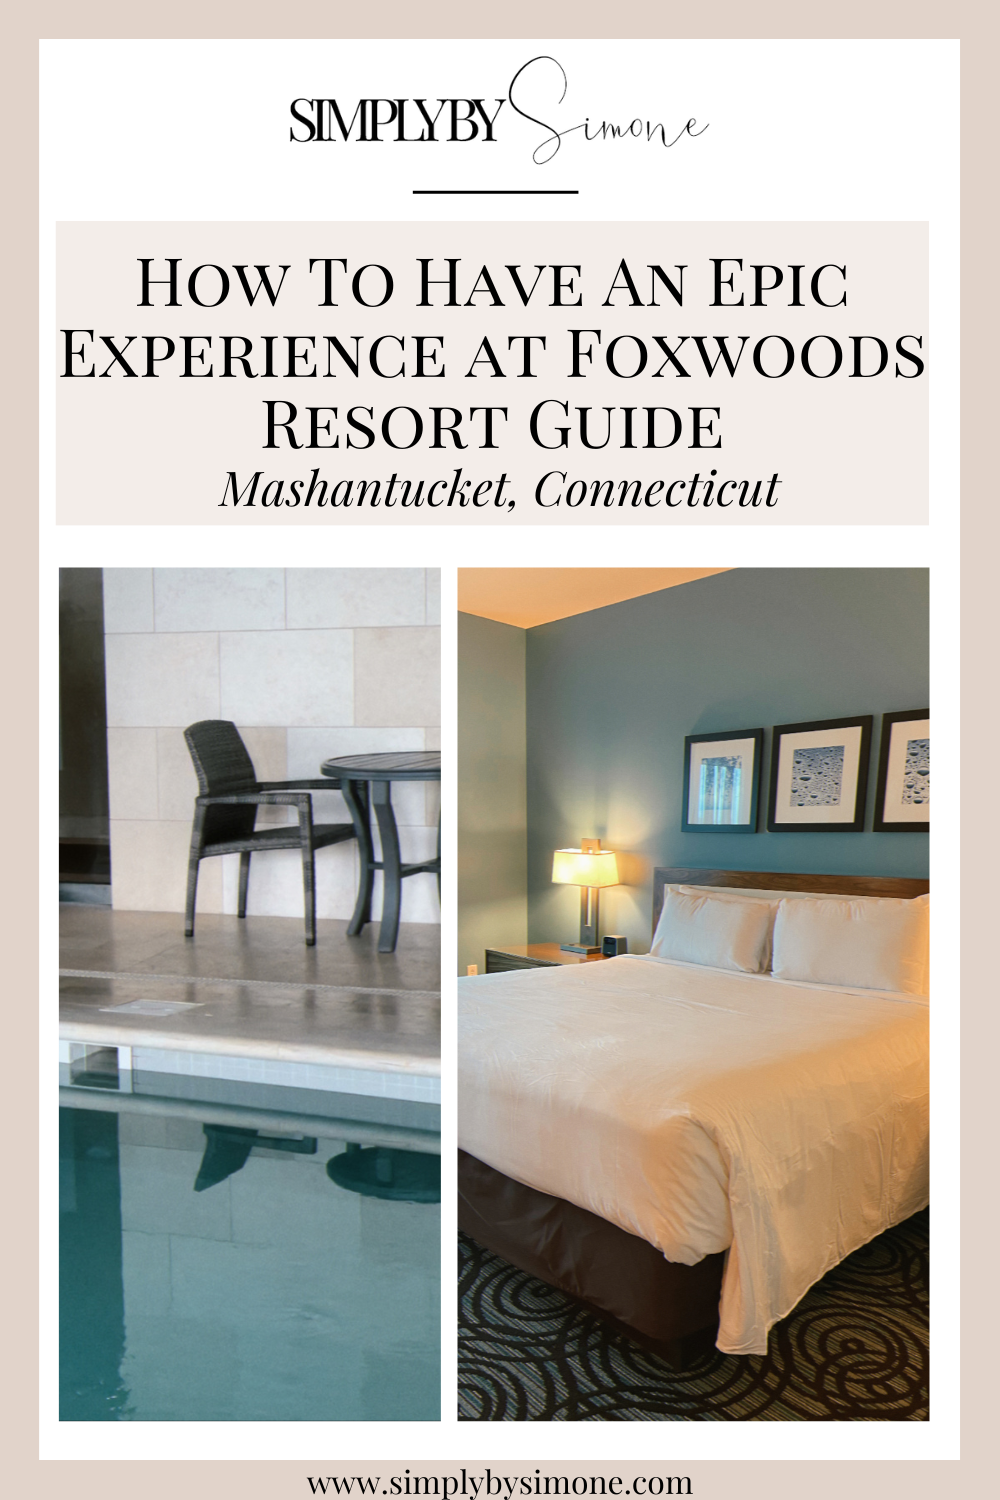 How To Have An Epic Experience at Foxwoods Resort Guide